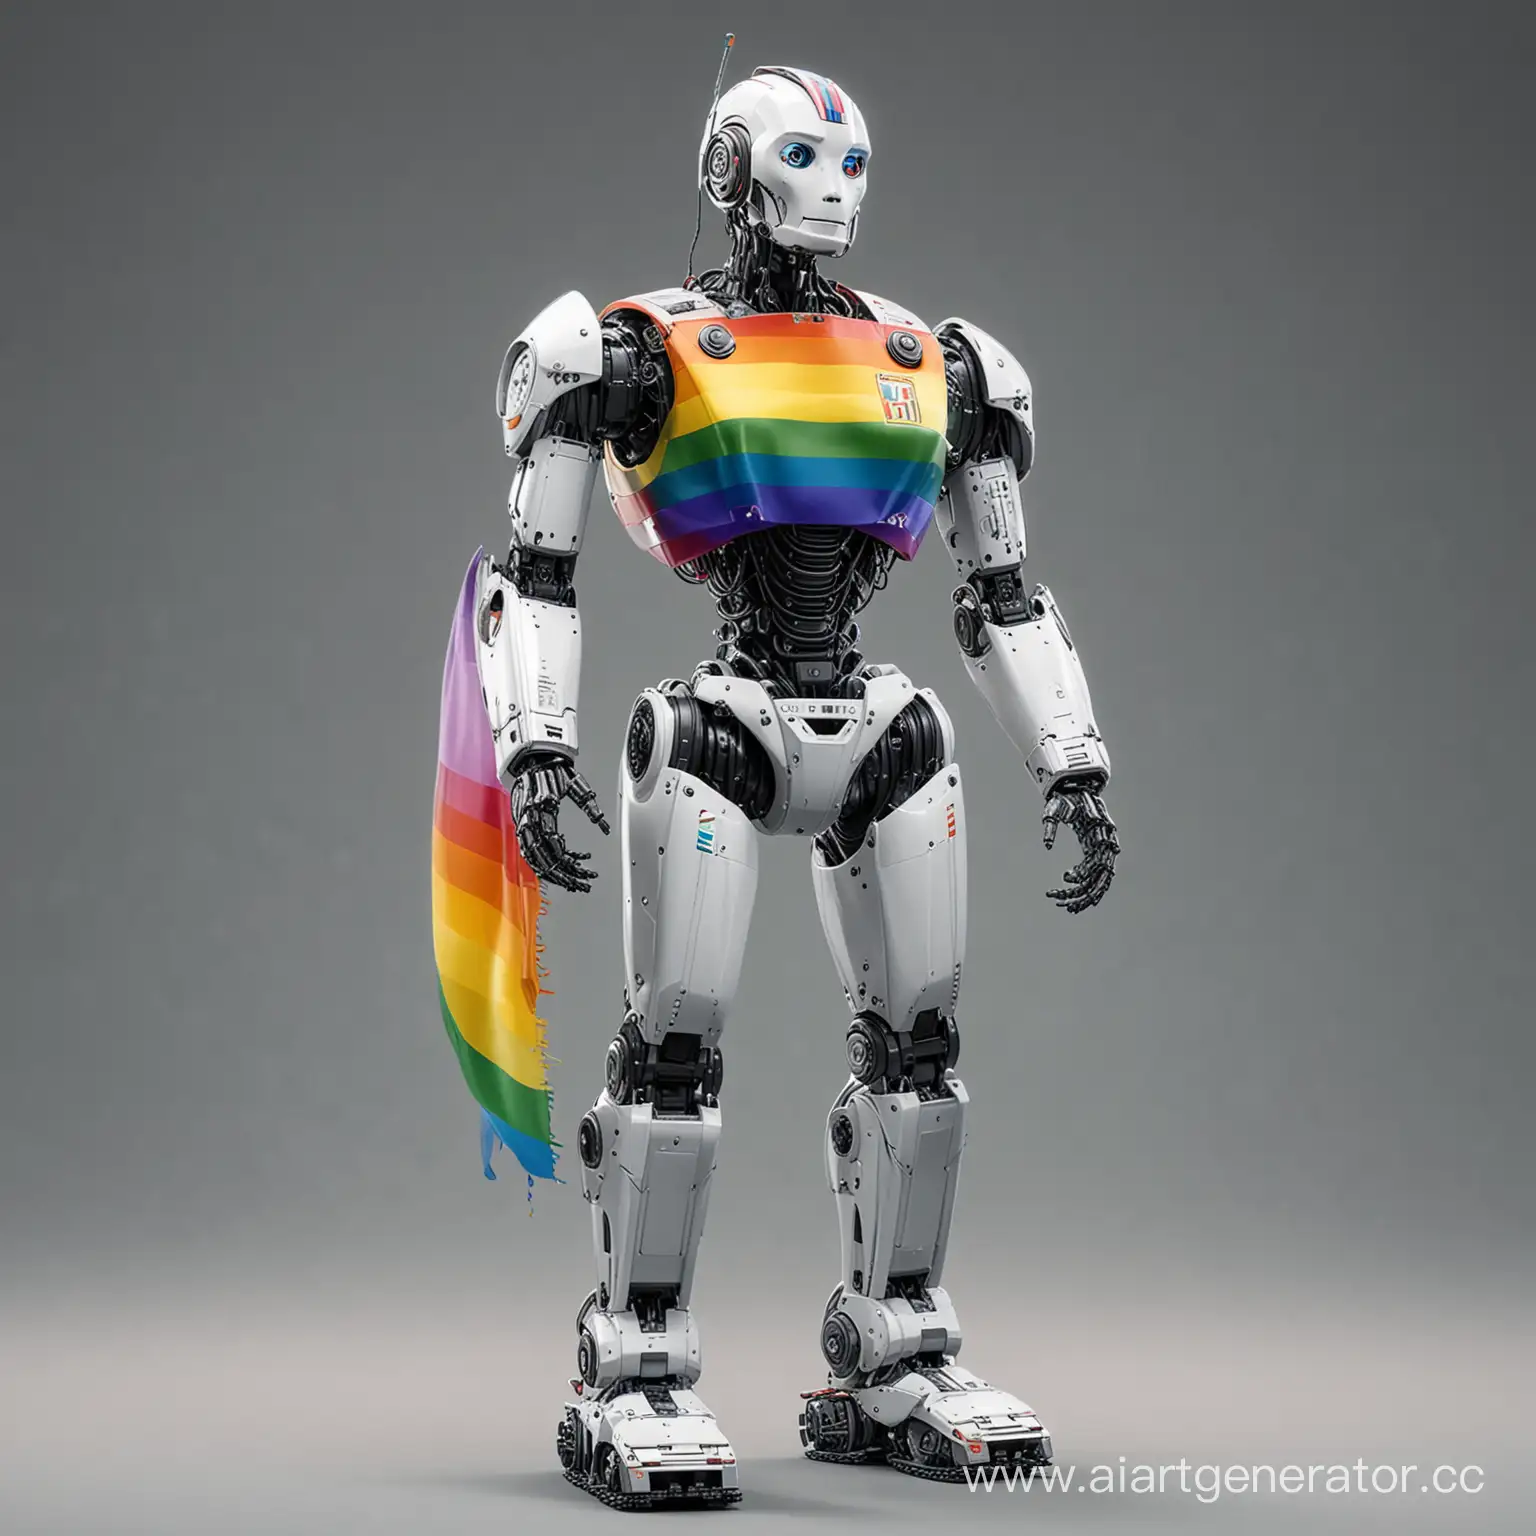 Colorful-Robot-Proudly-Displaying-LGBT-Flag